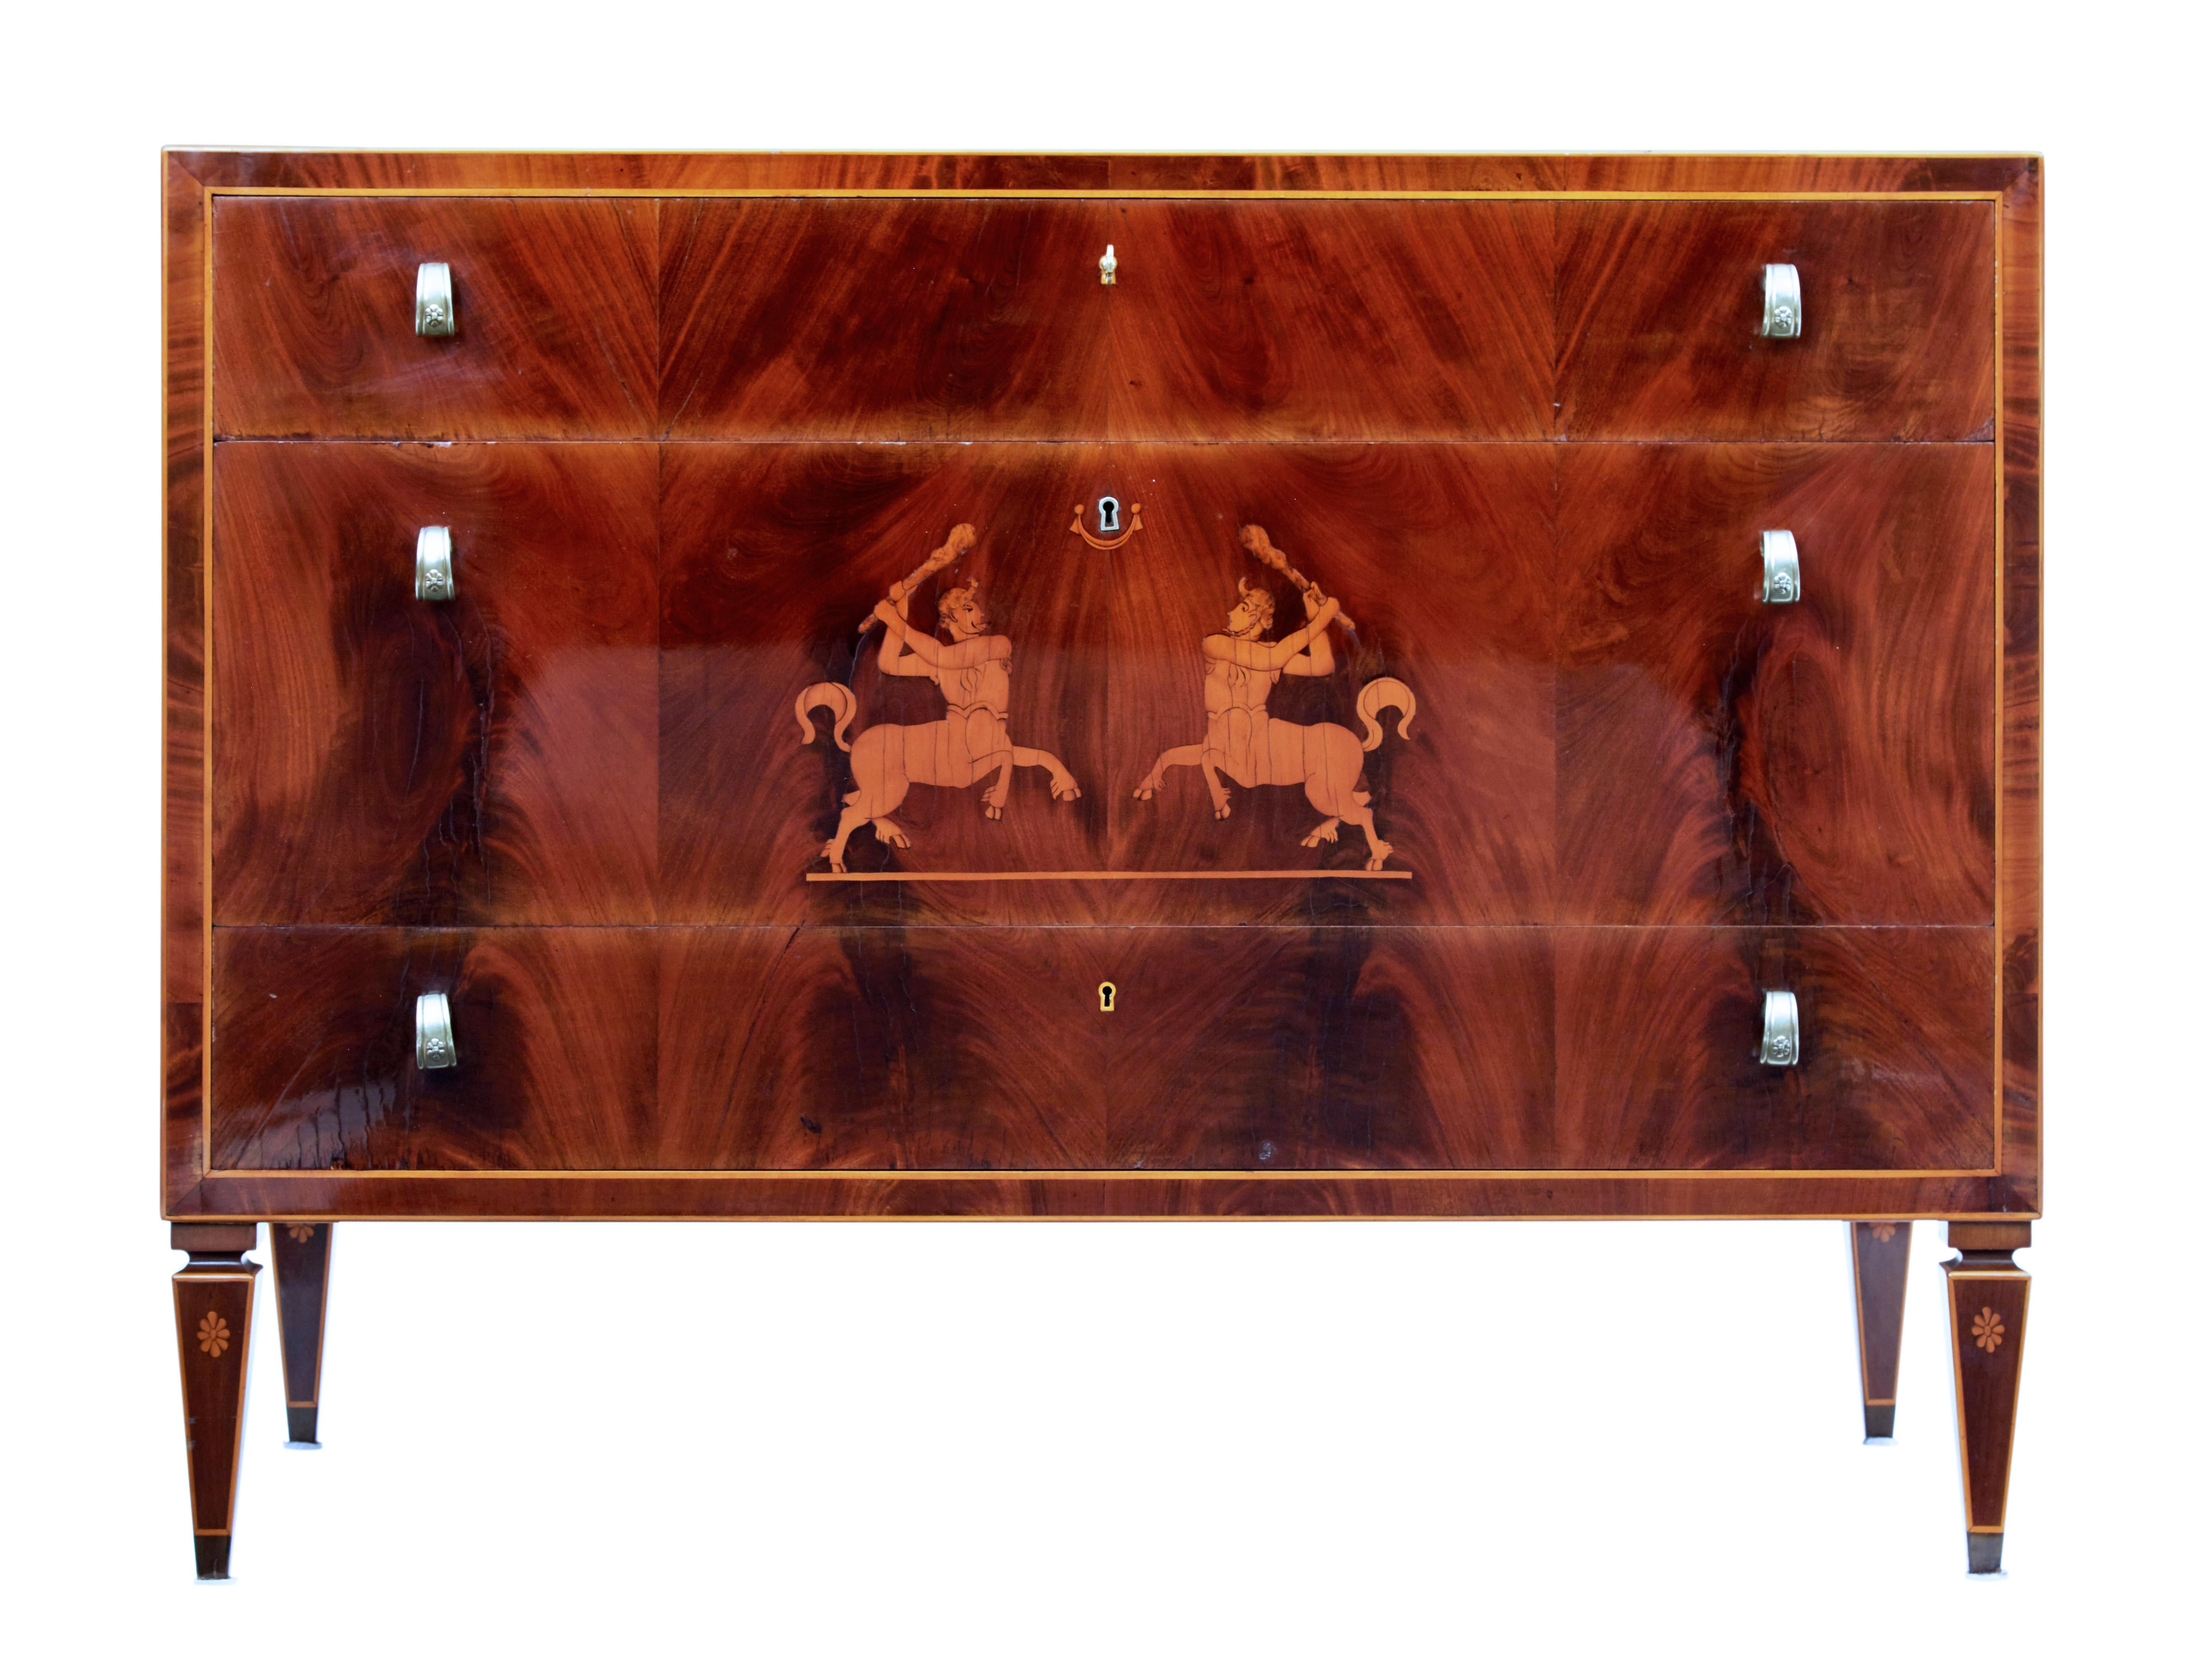 Stunning period Art Deco chest of drawers circa 1931.

Flame mahogany top surface with crossbanding and stringing. 3 drawers to the front of varying depth. Middle drawer with inlaid battling centaurs. Decorative looped handles.

Oak lined